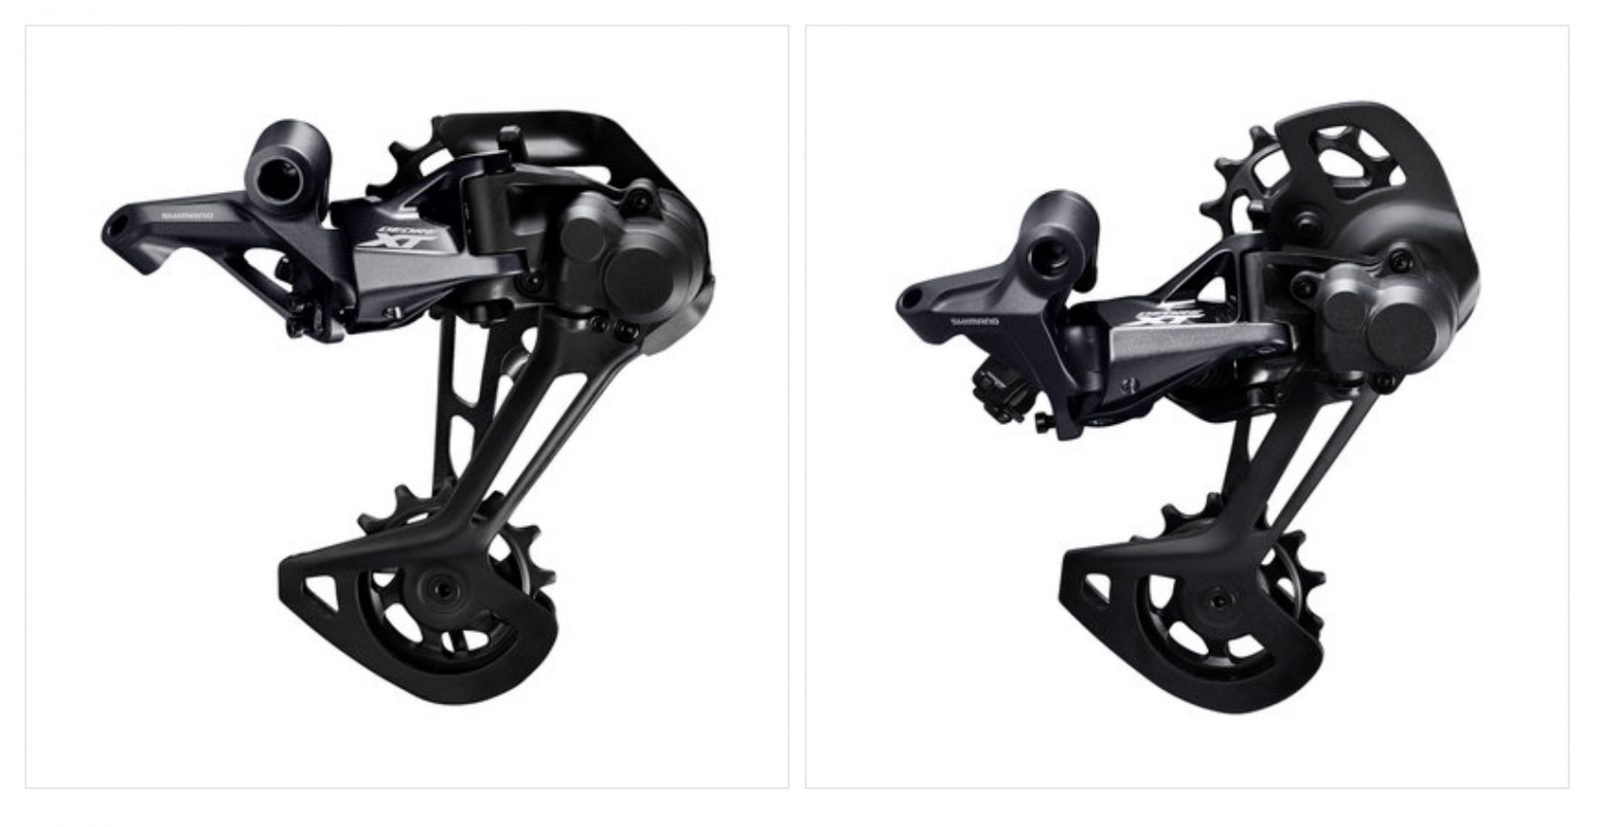 First Review: Shimano XT M8100 and SLX M7100 – presenting Shimano's  entry-level 12-speed drivetrains